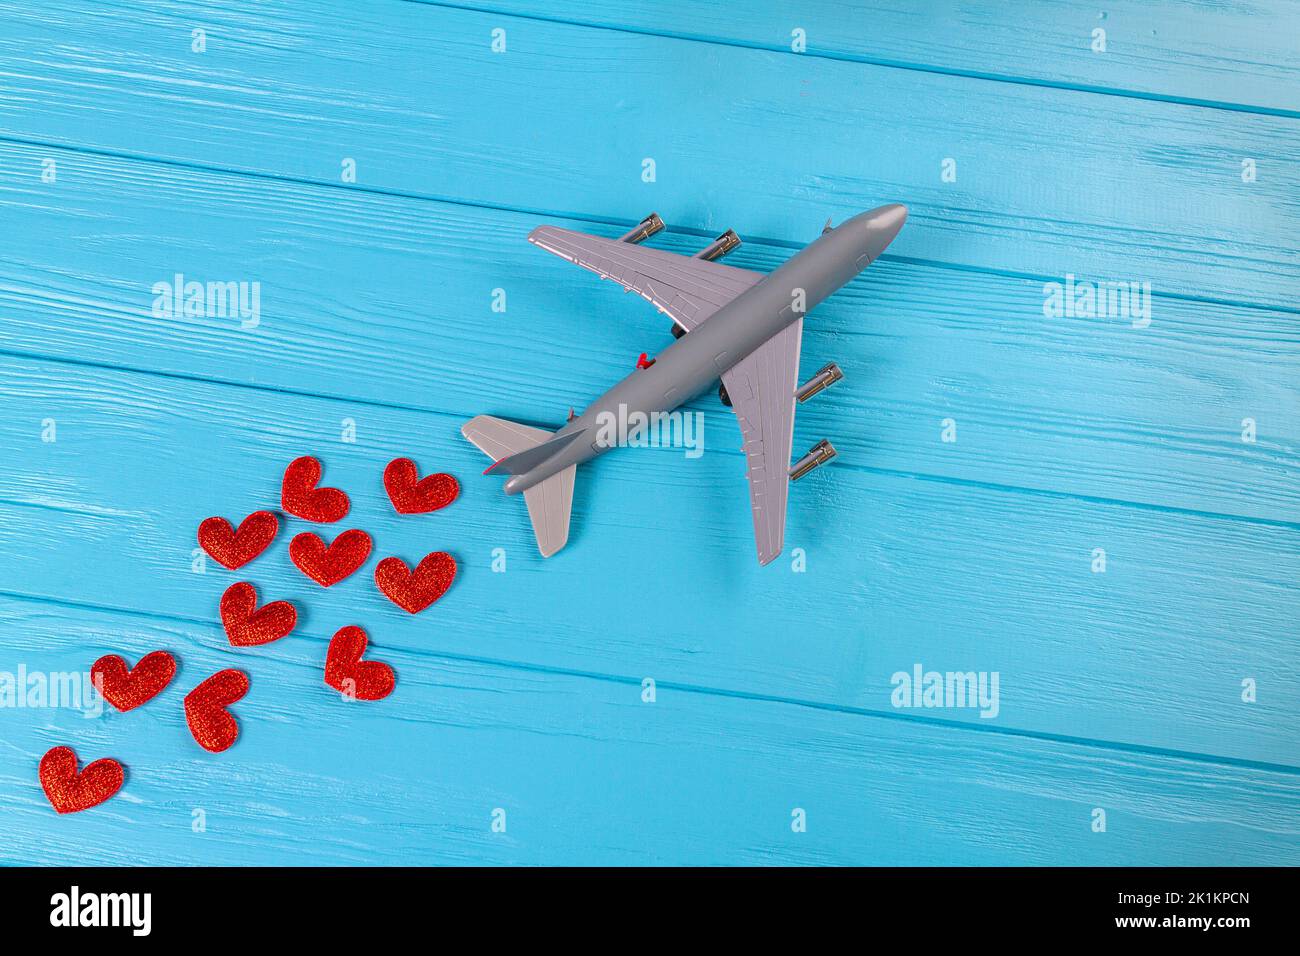 Top view of toy passenger boeing plane with red hearts. Blue wooden desk surface. Stock Photo